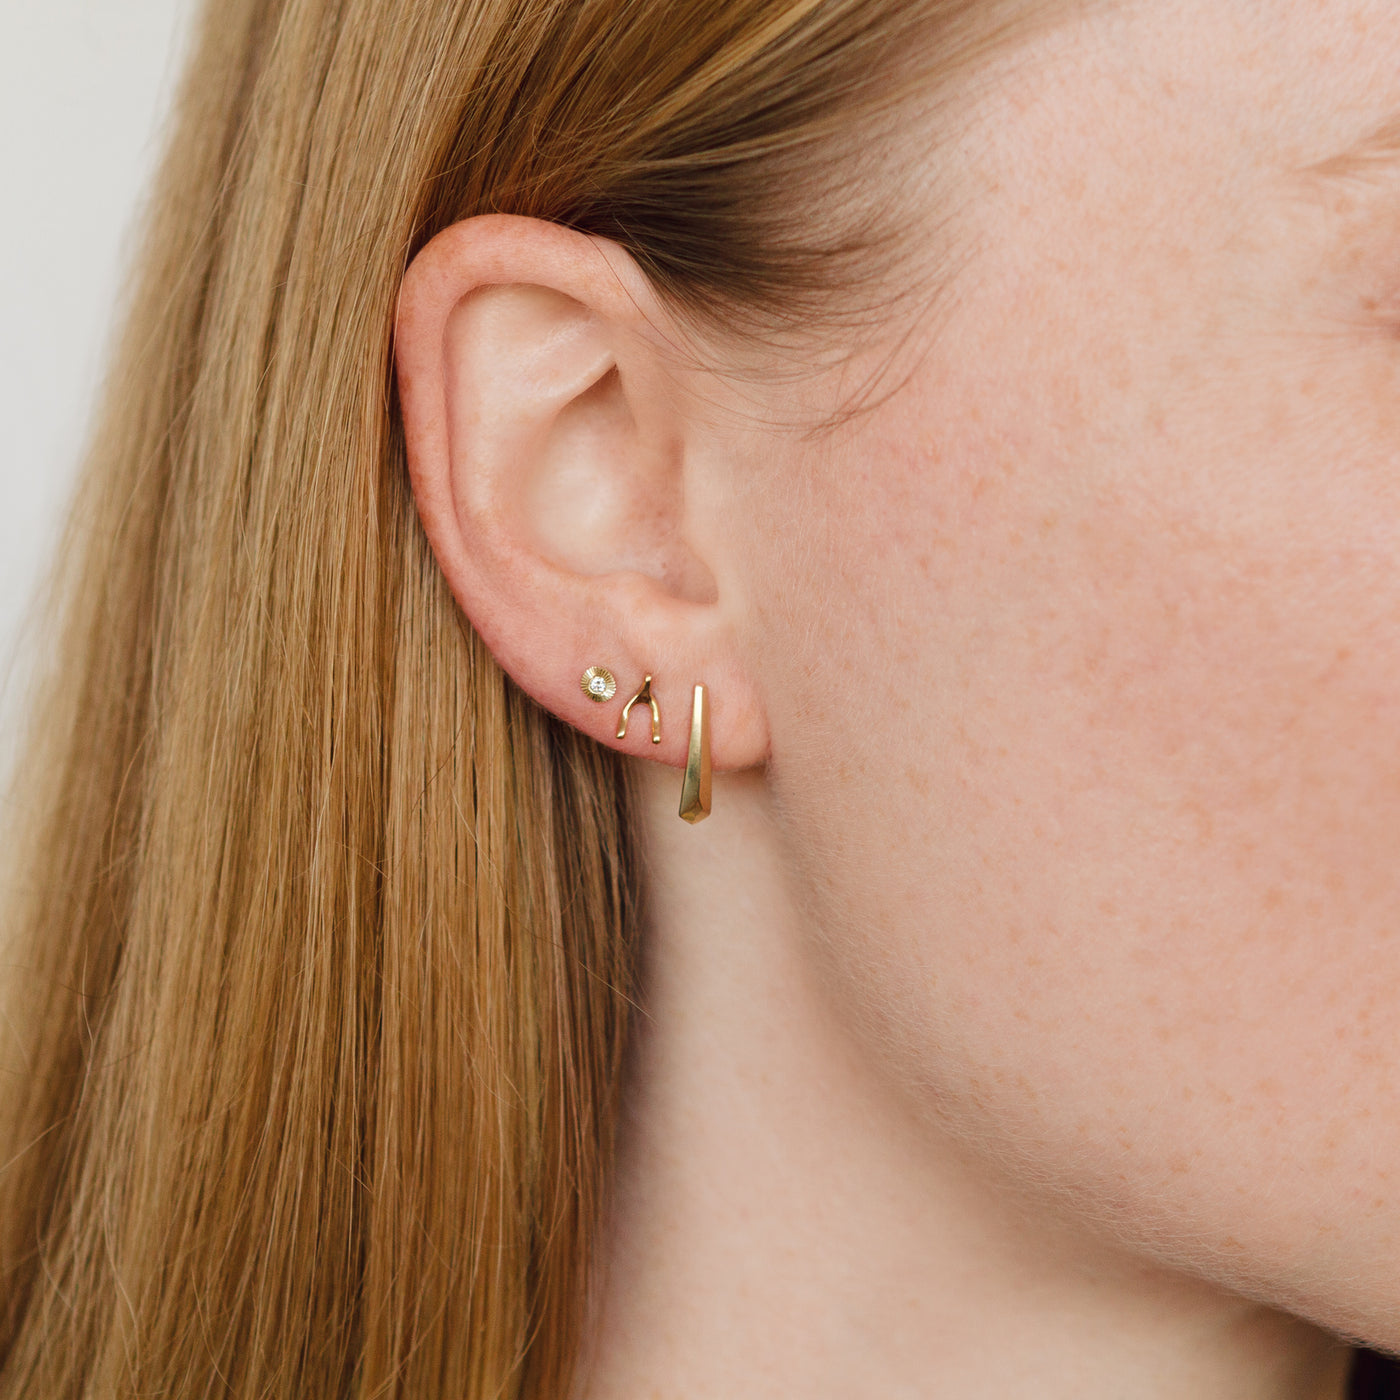 Gold wishbone stud earrings with gold and diamond micro aurora stud earrings and gold tapered fragment studs on an ear